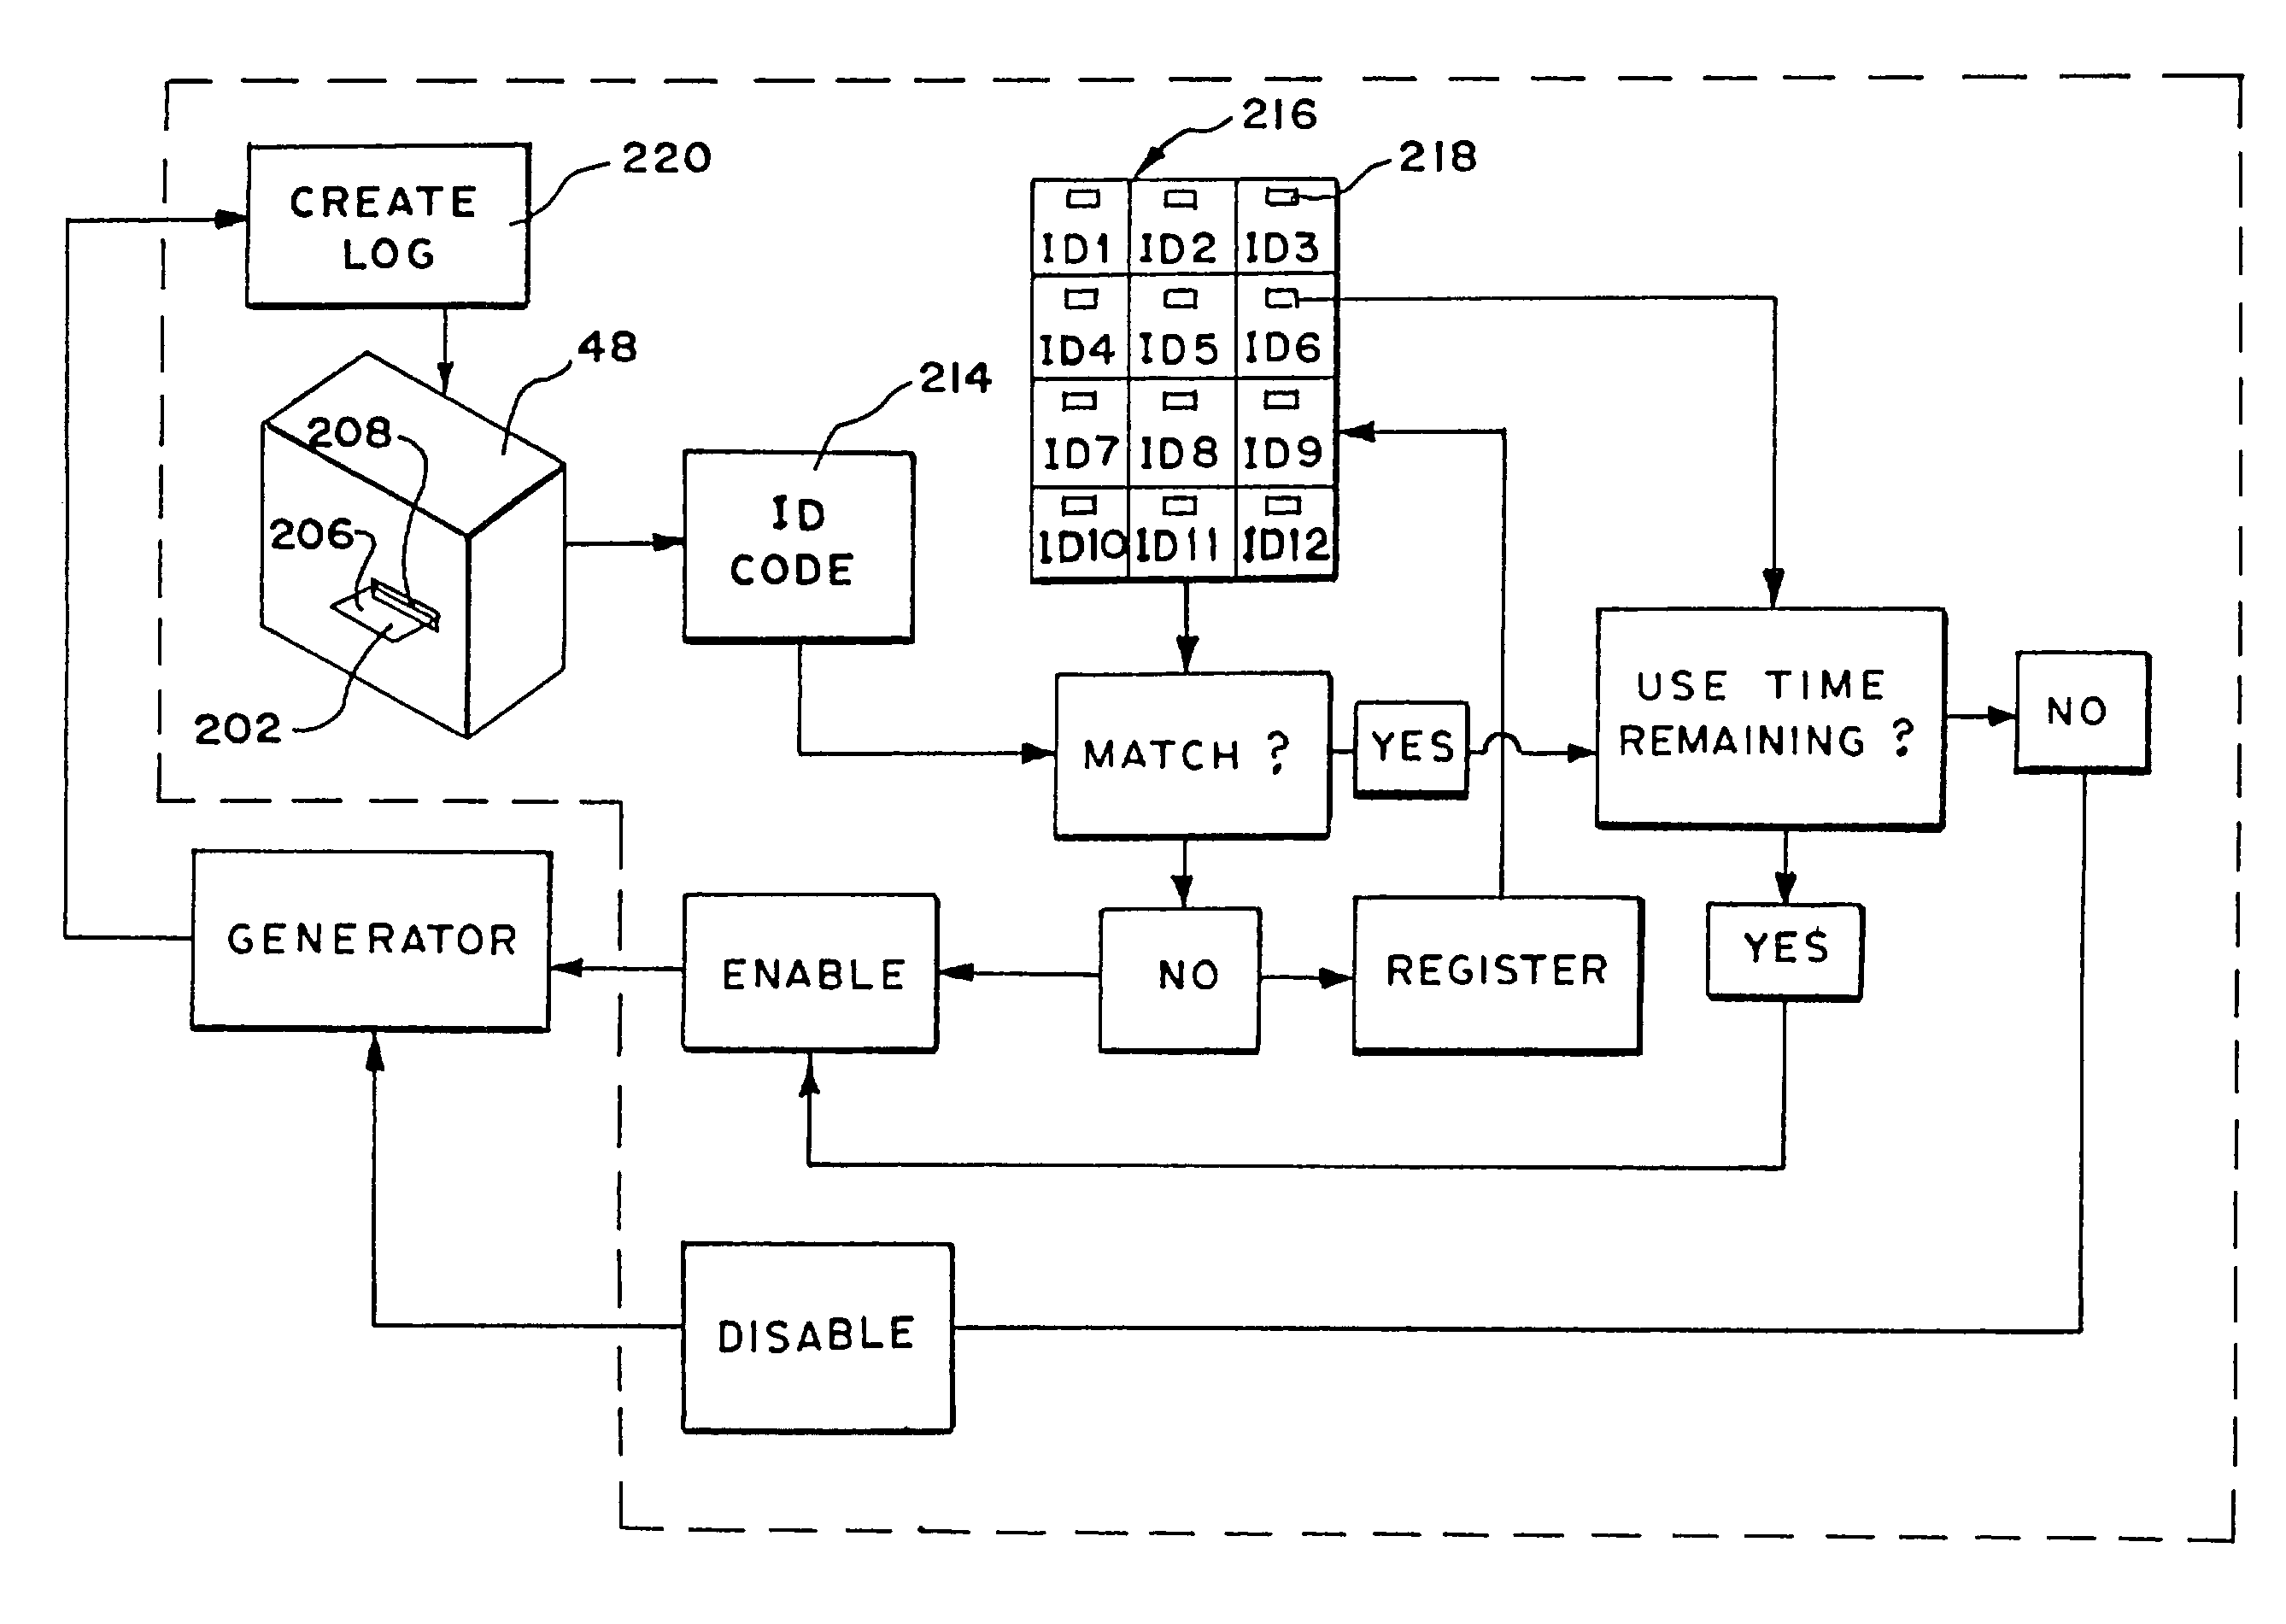 Graphical user interface for monitoring and controlling use of medical devices